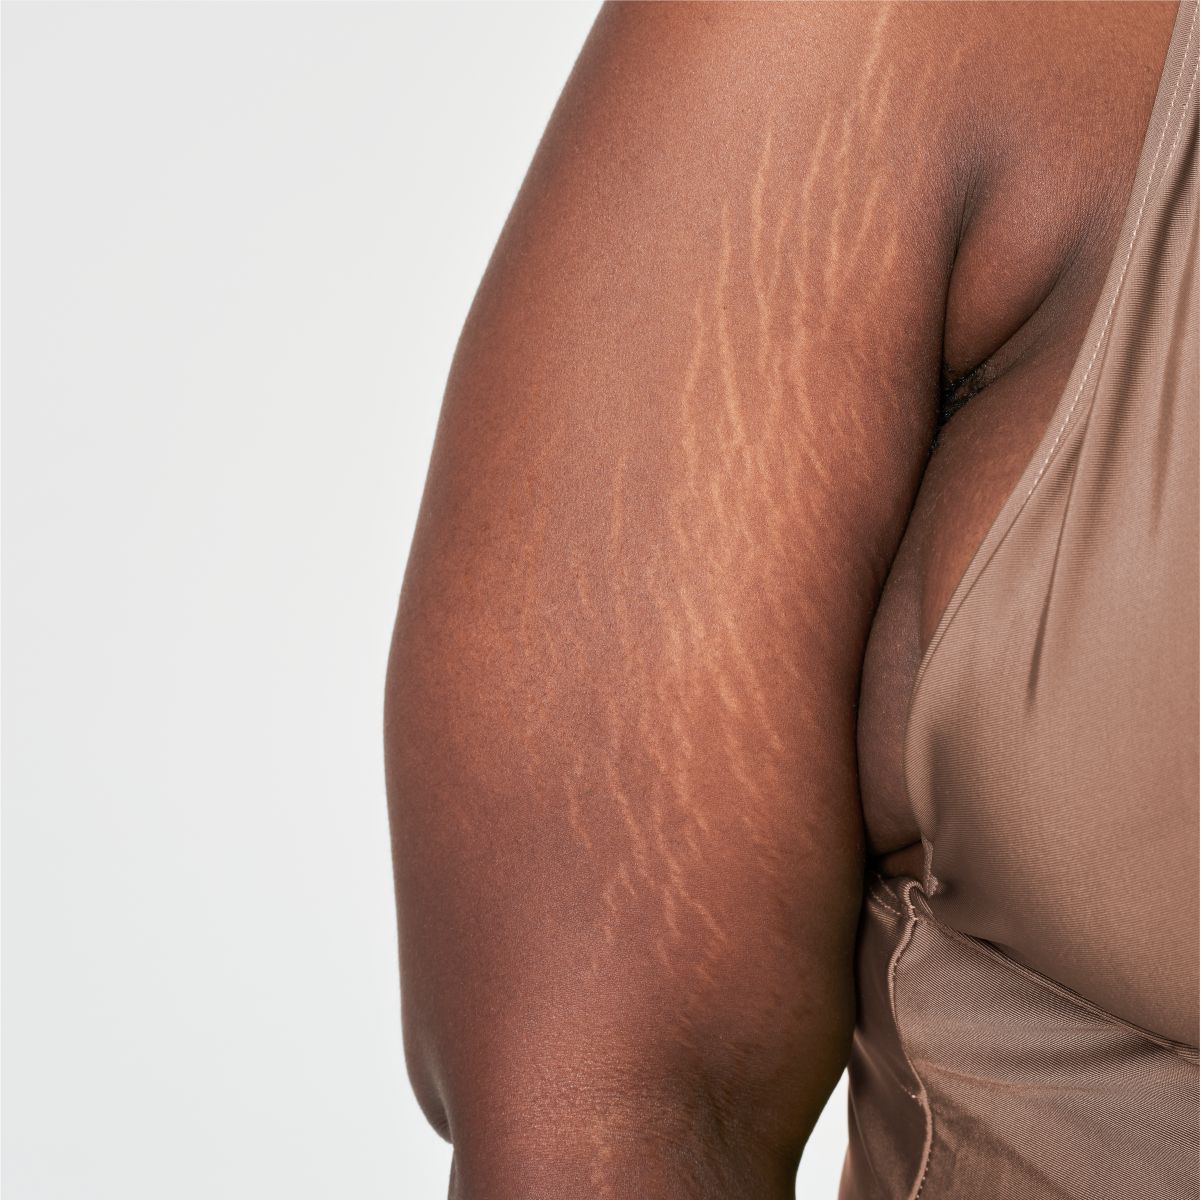 Microneedling For Stretch Marks